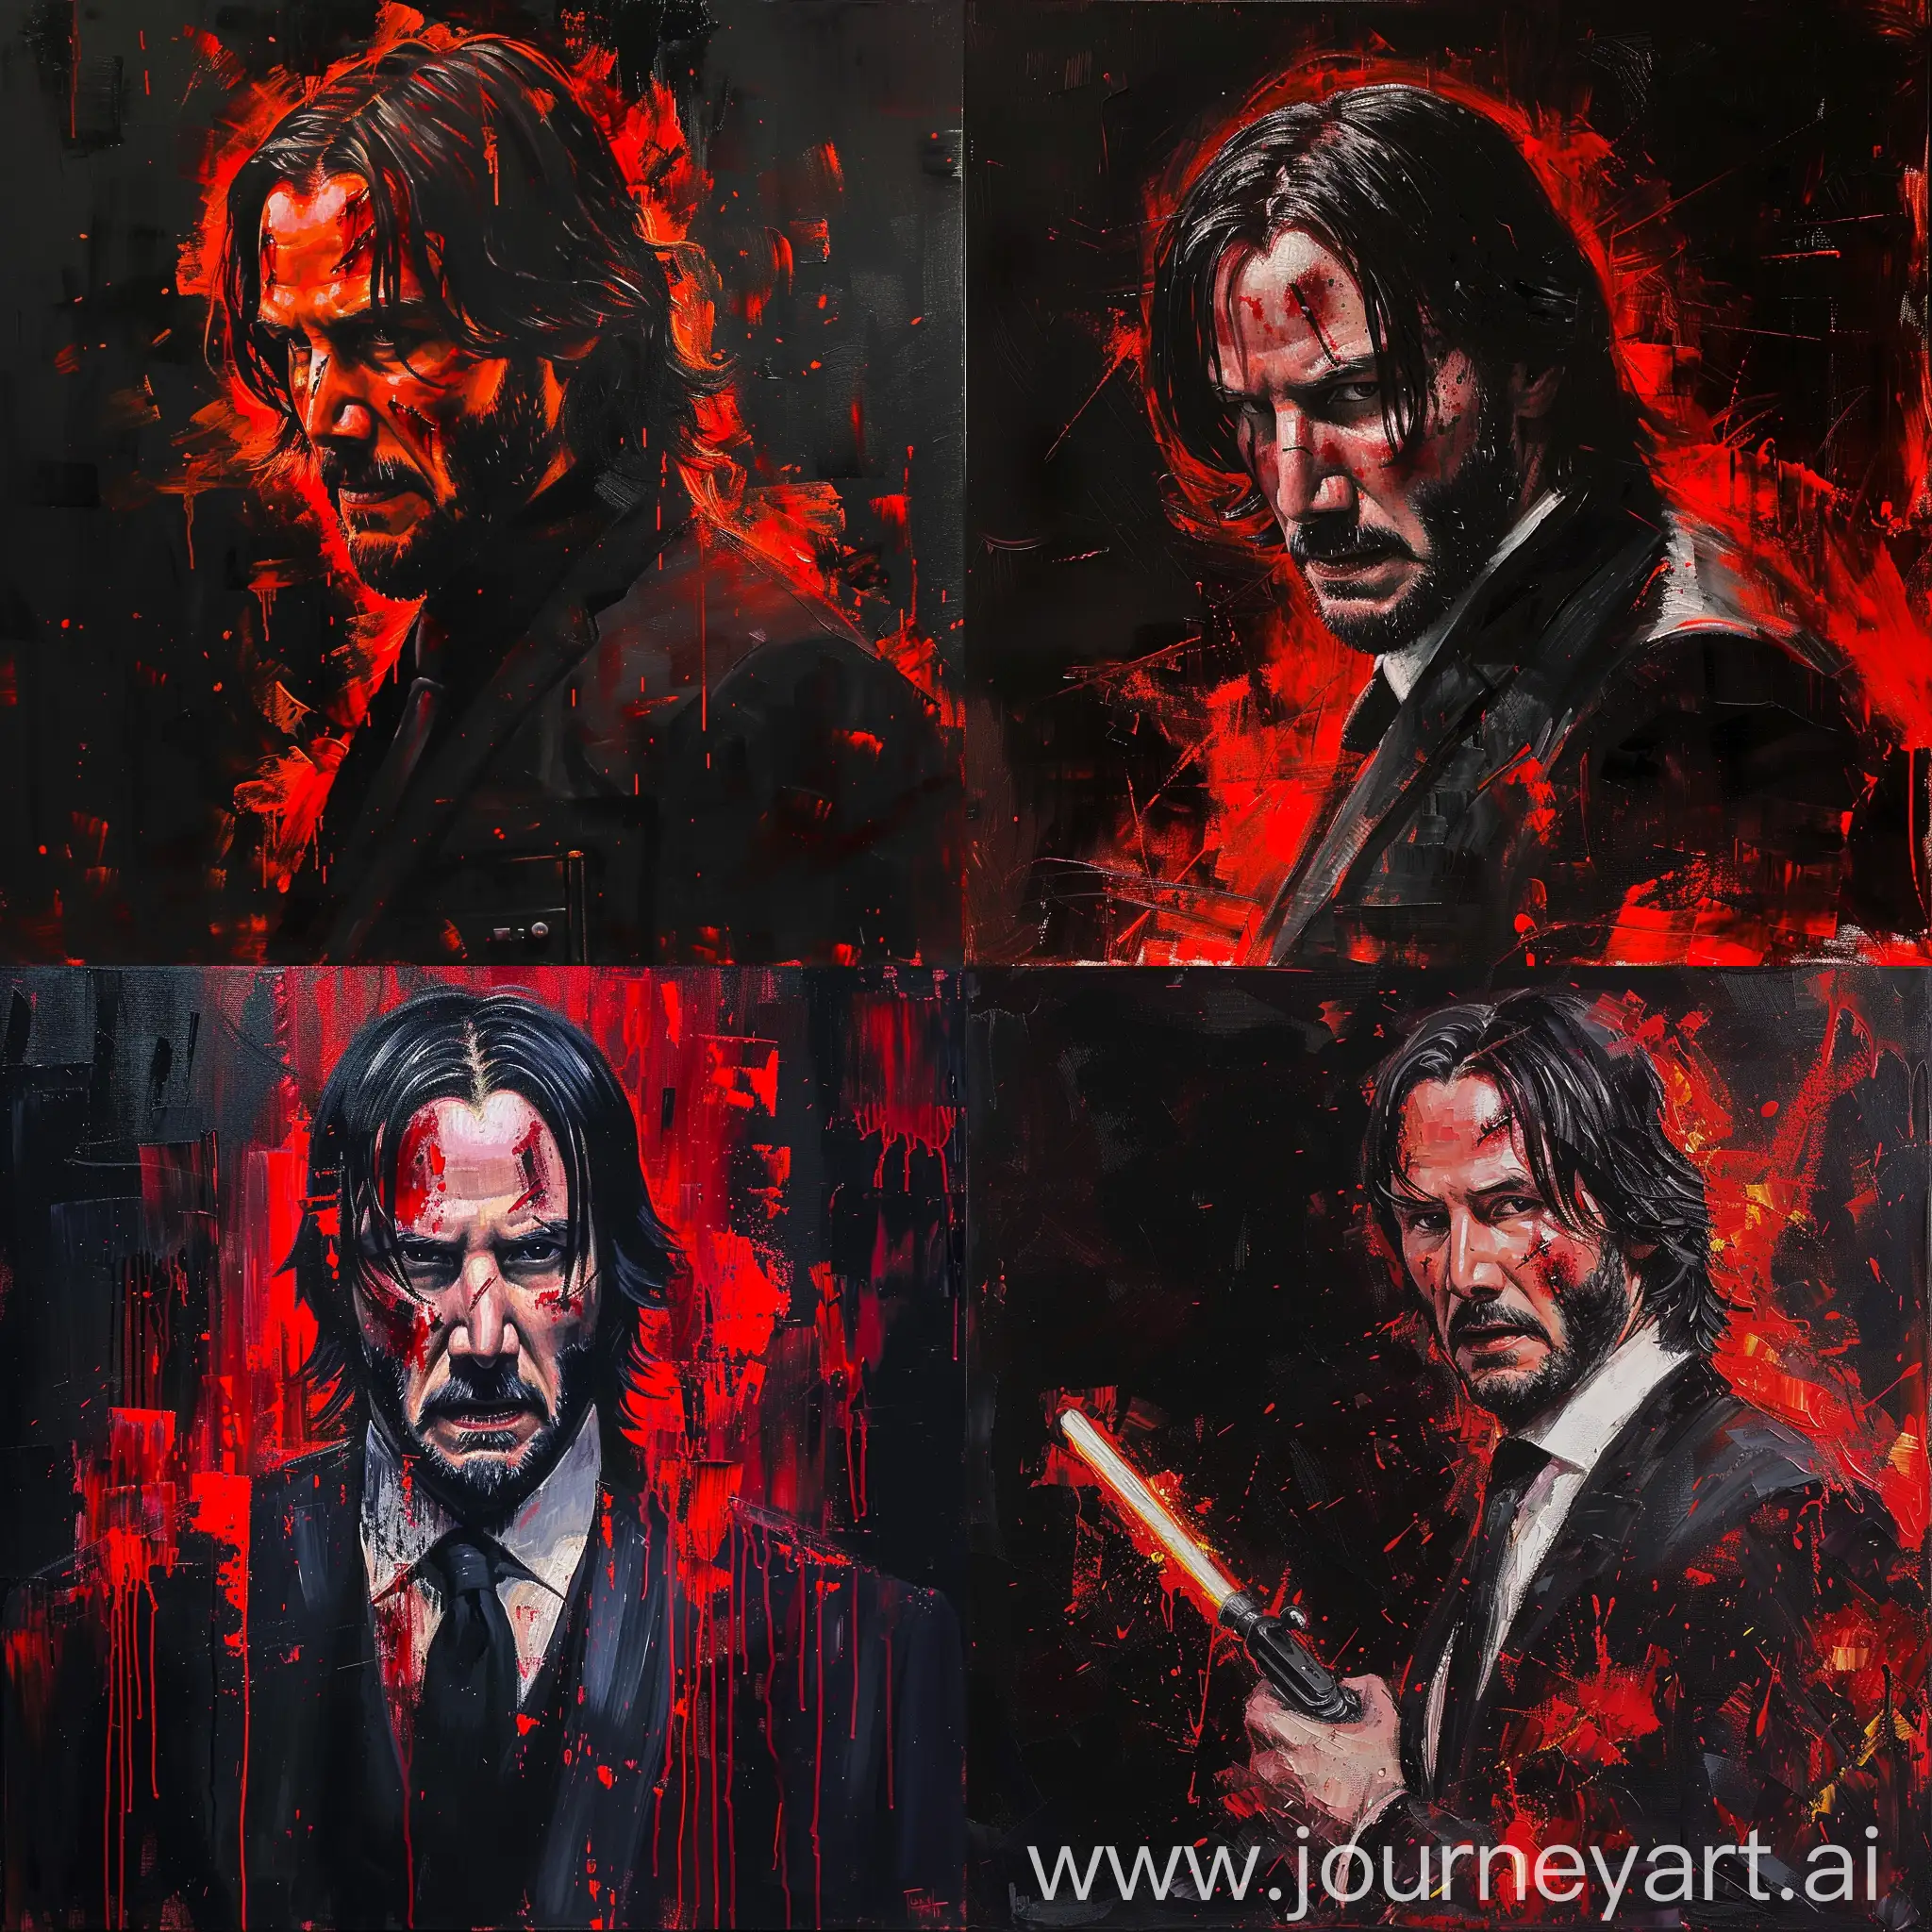 John-Wick-Star-Wars-Oil-Painting-Dark-Moody-Portrait-with-Bright-Red-ChalkLike-Accents